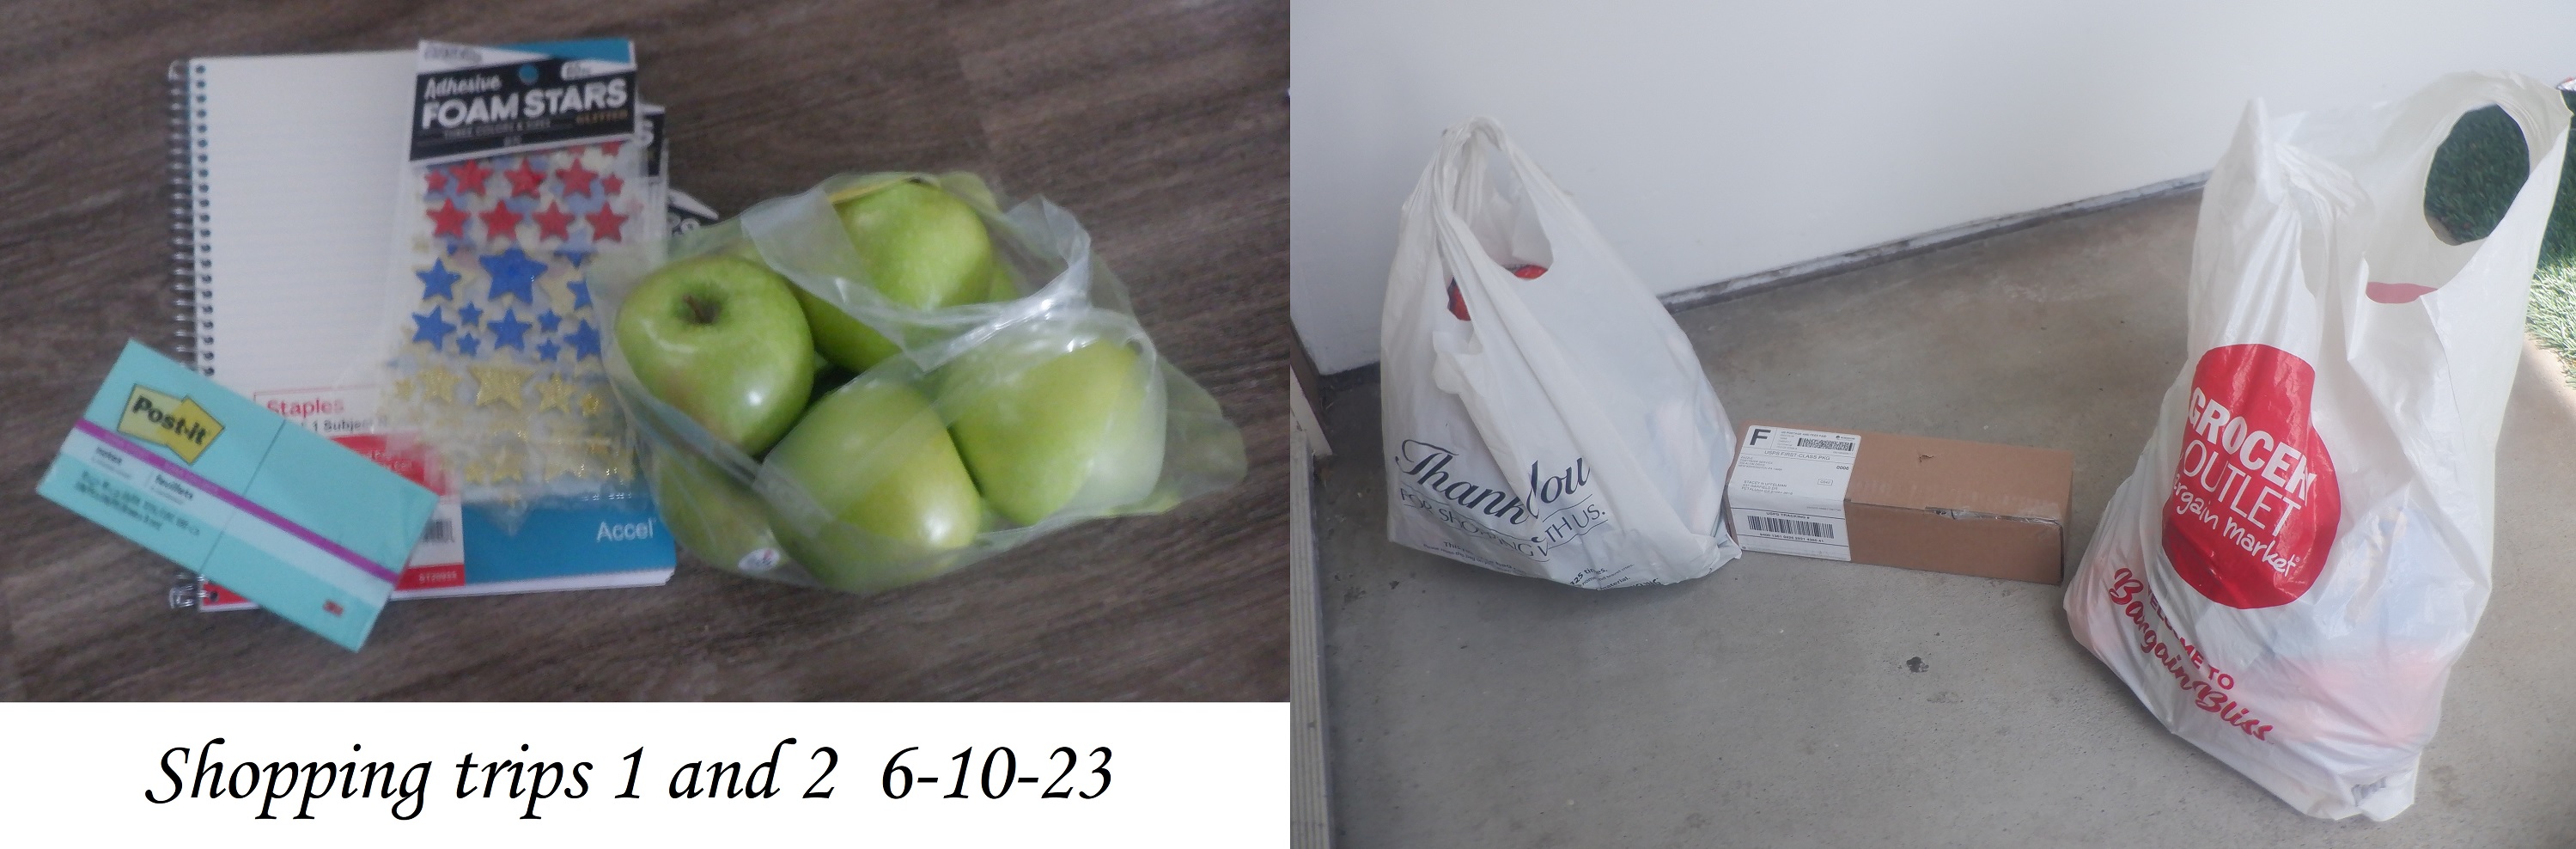 Photos I took of things from my two shopping trips and package at the door when I got home the second time